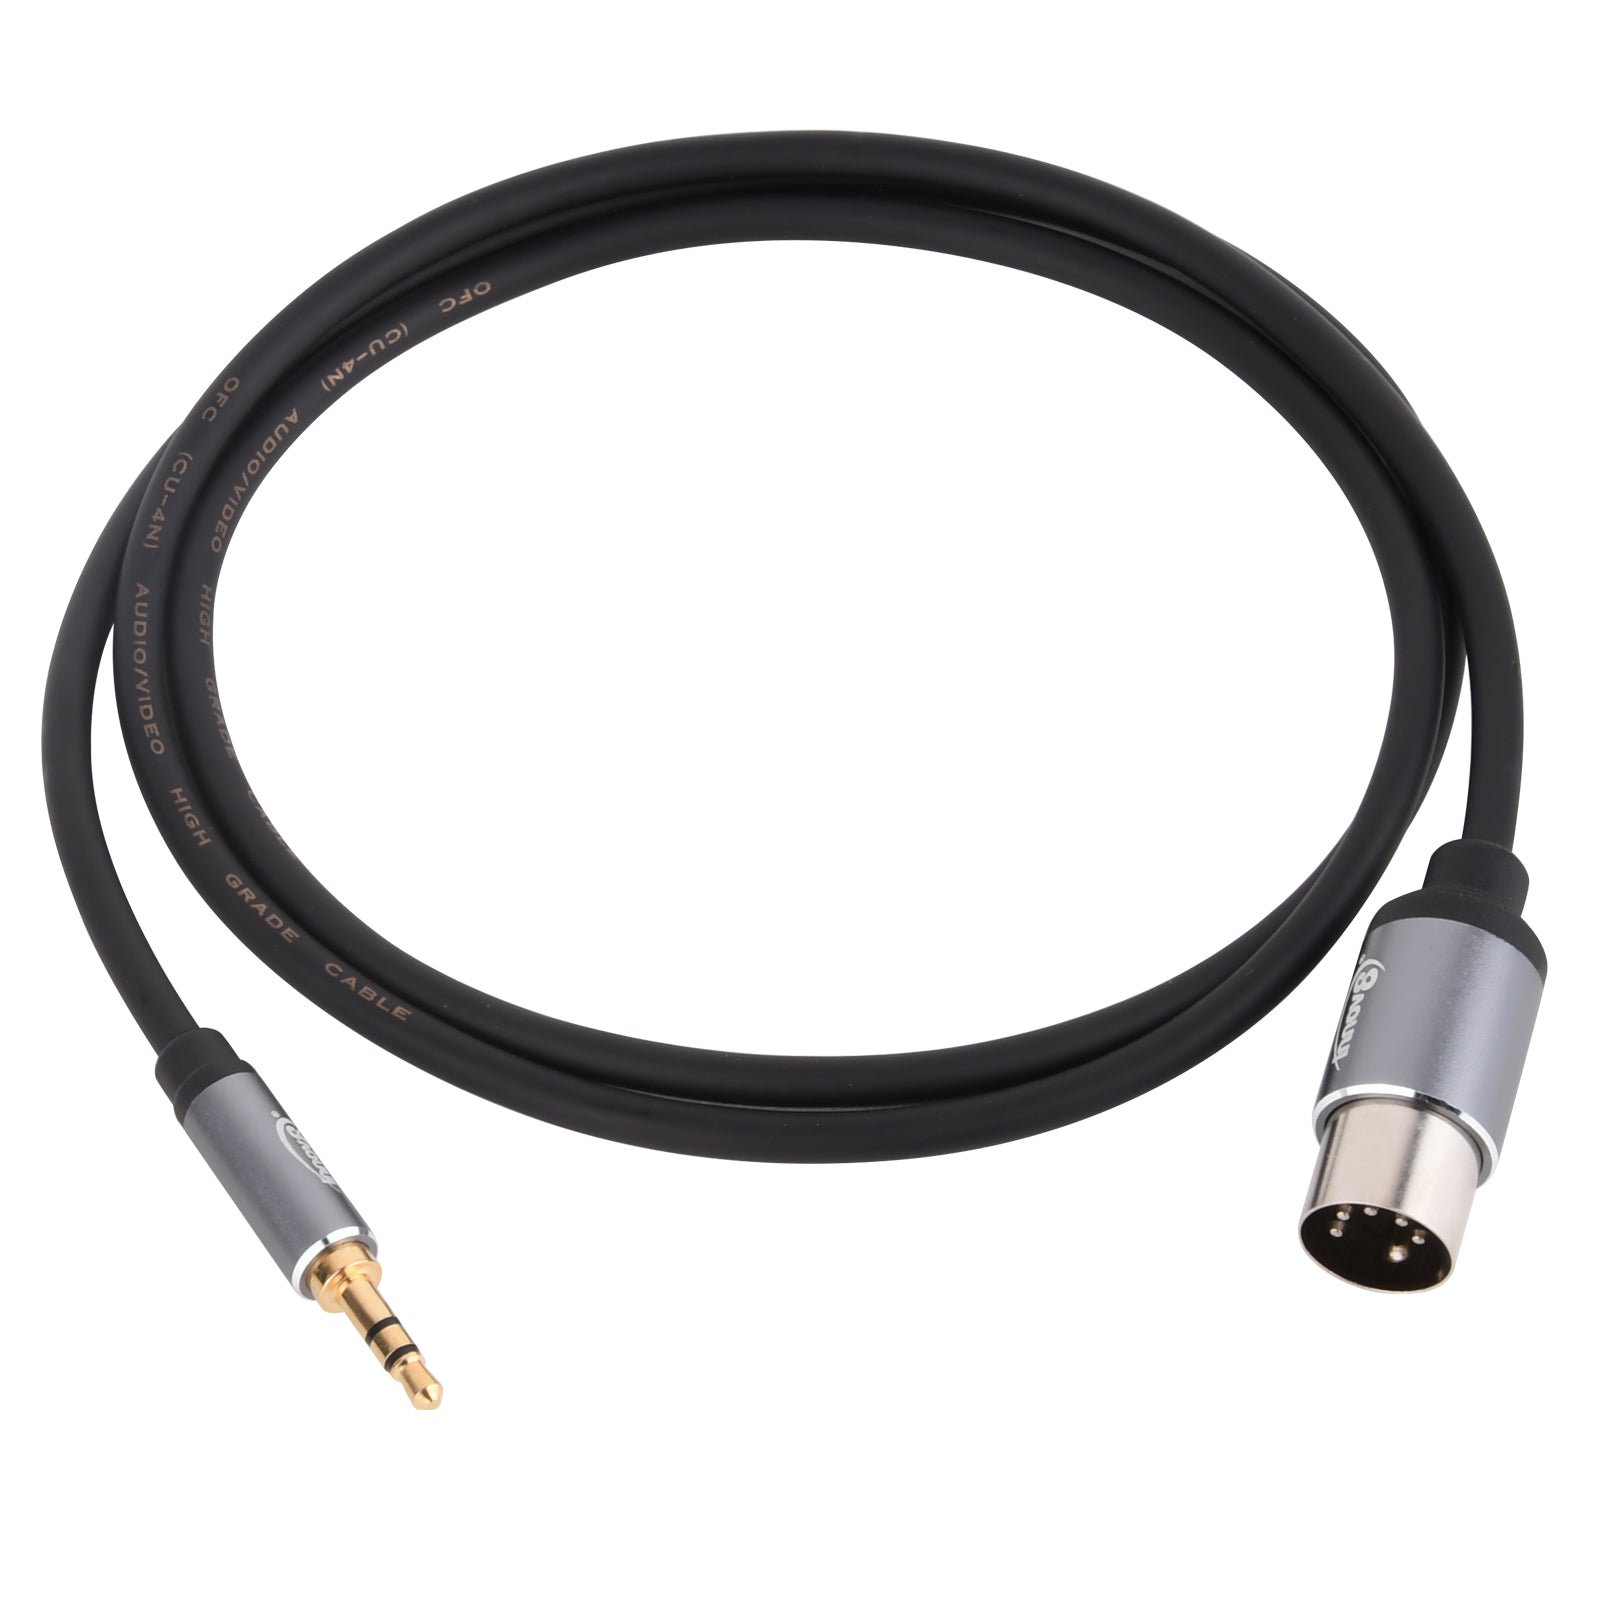 5 Pin DIN Male to 3.5mm TRS Stereo Male Jack Converter Cable for Vintage Stereo Radio Audio Equipment 1M